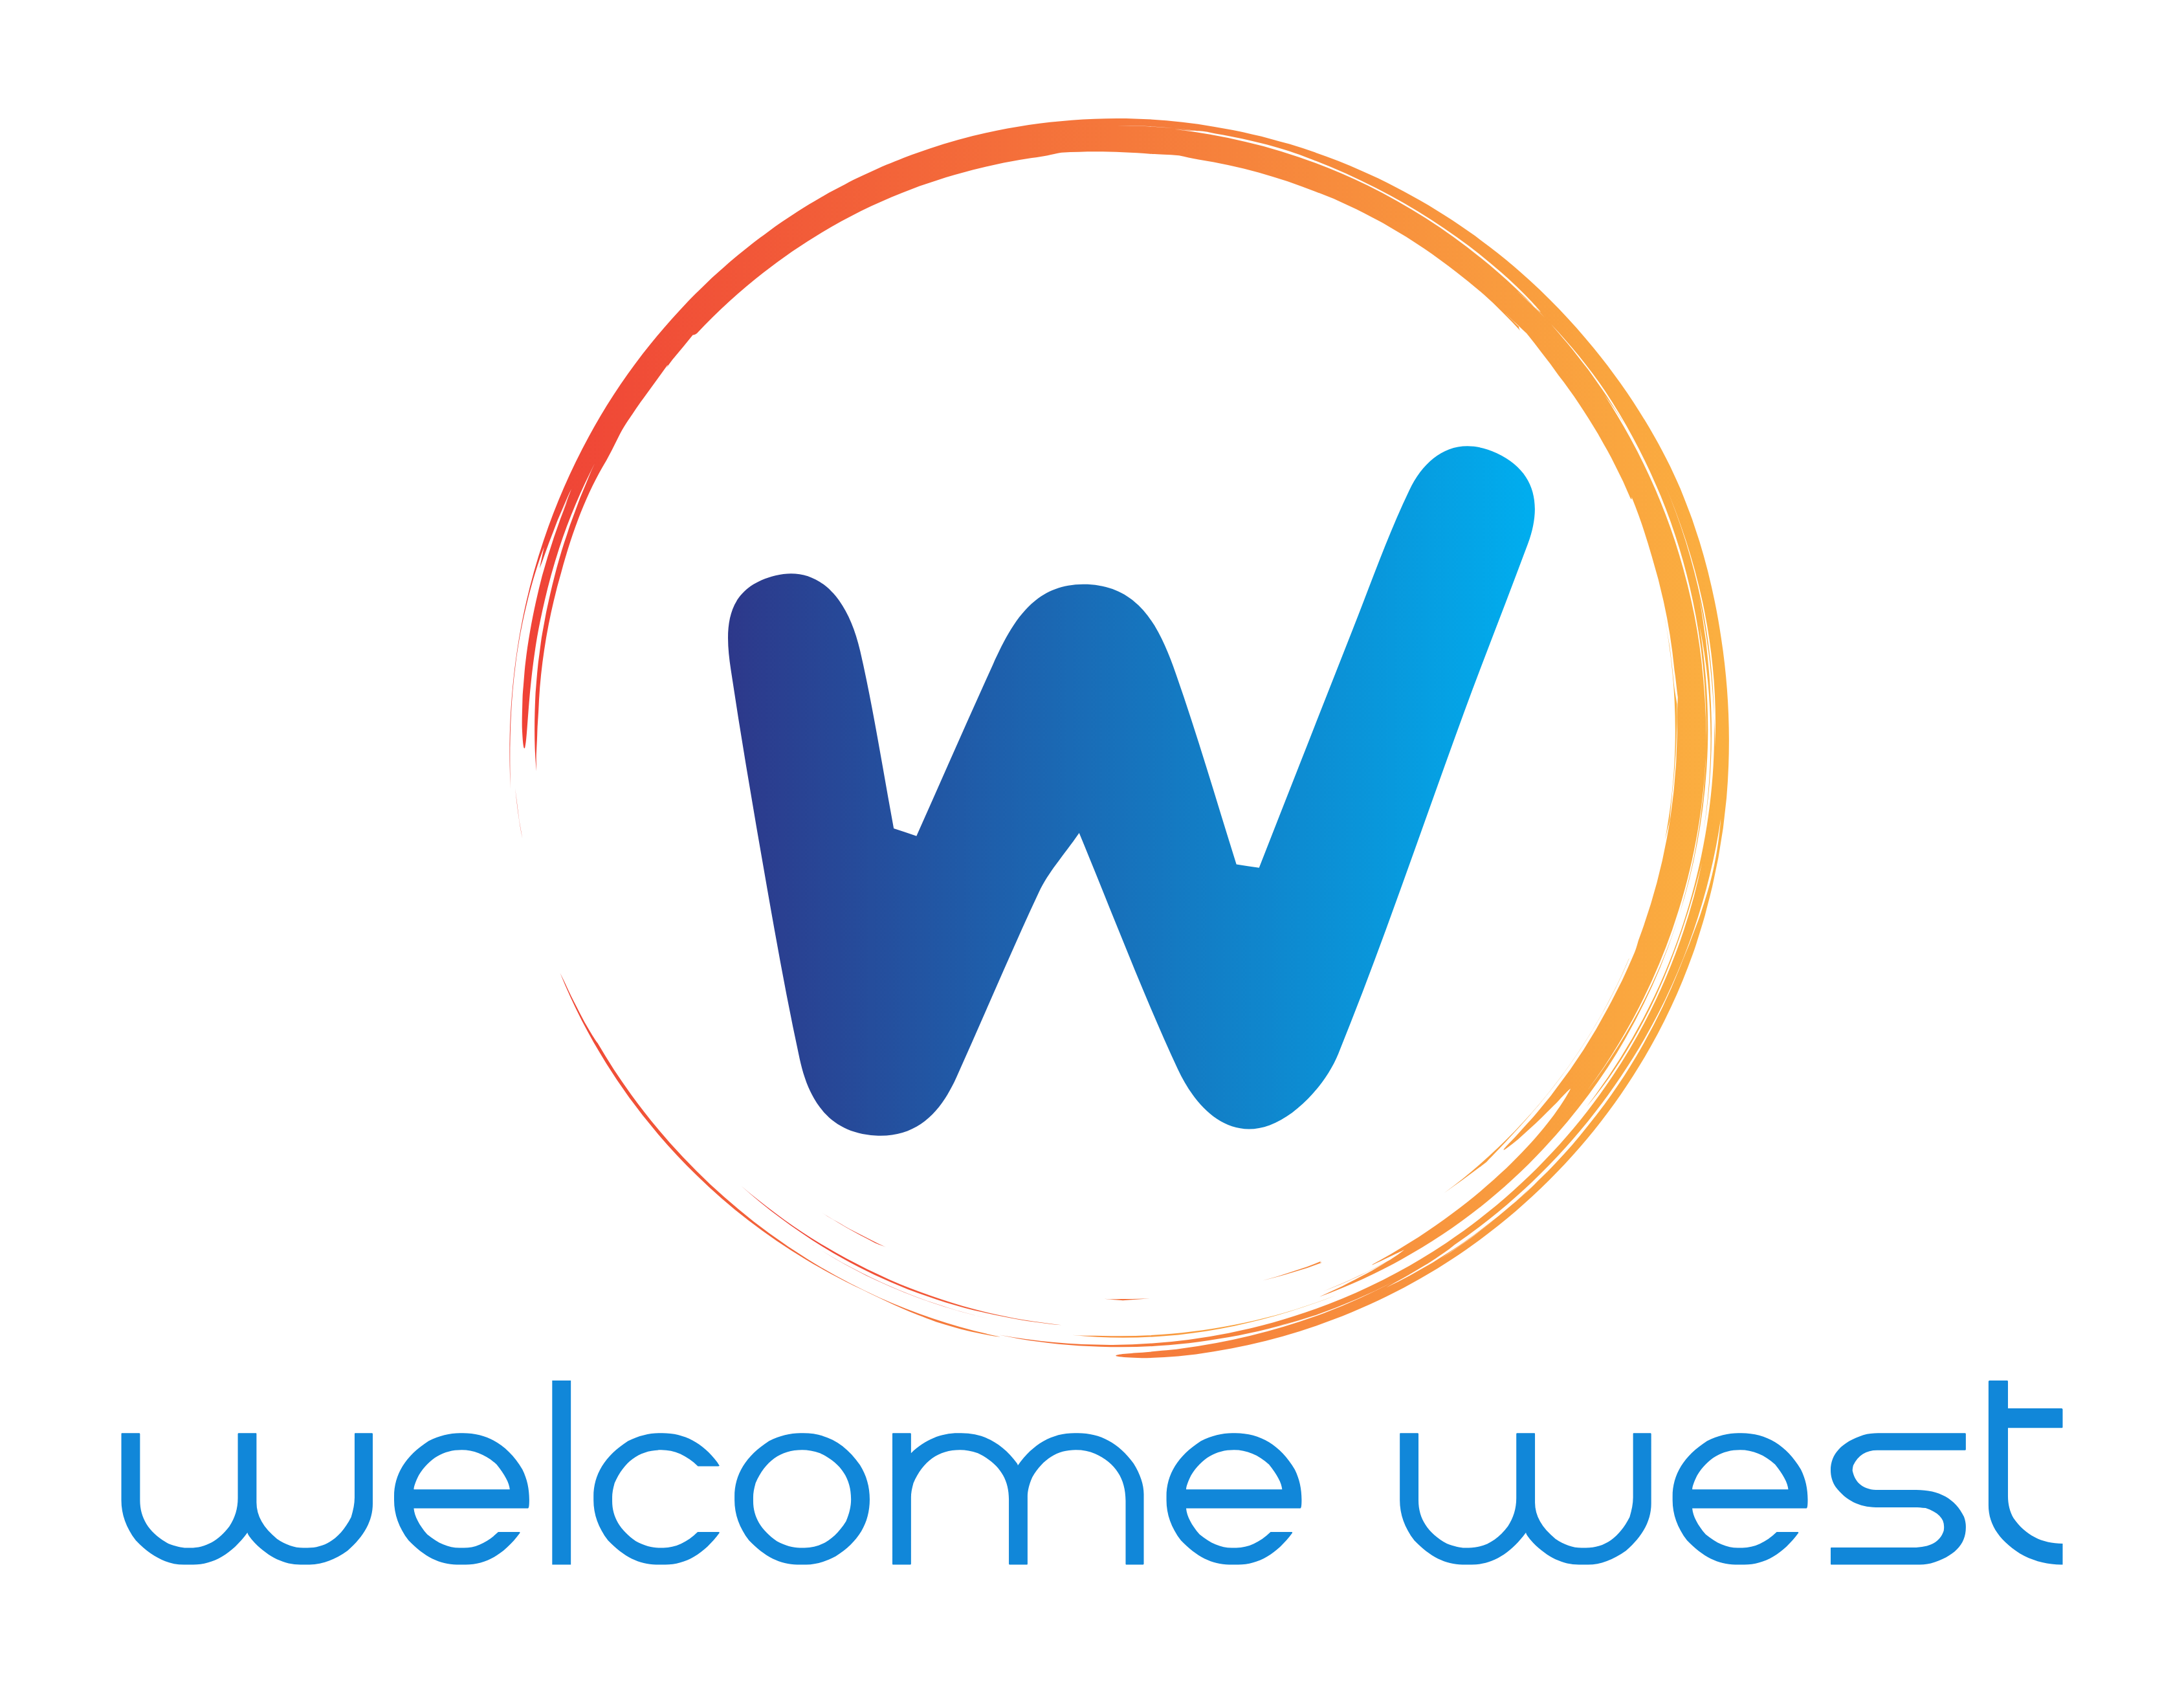 Welcome West logo 1